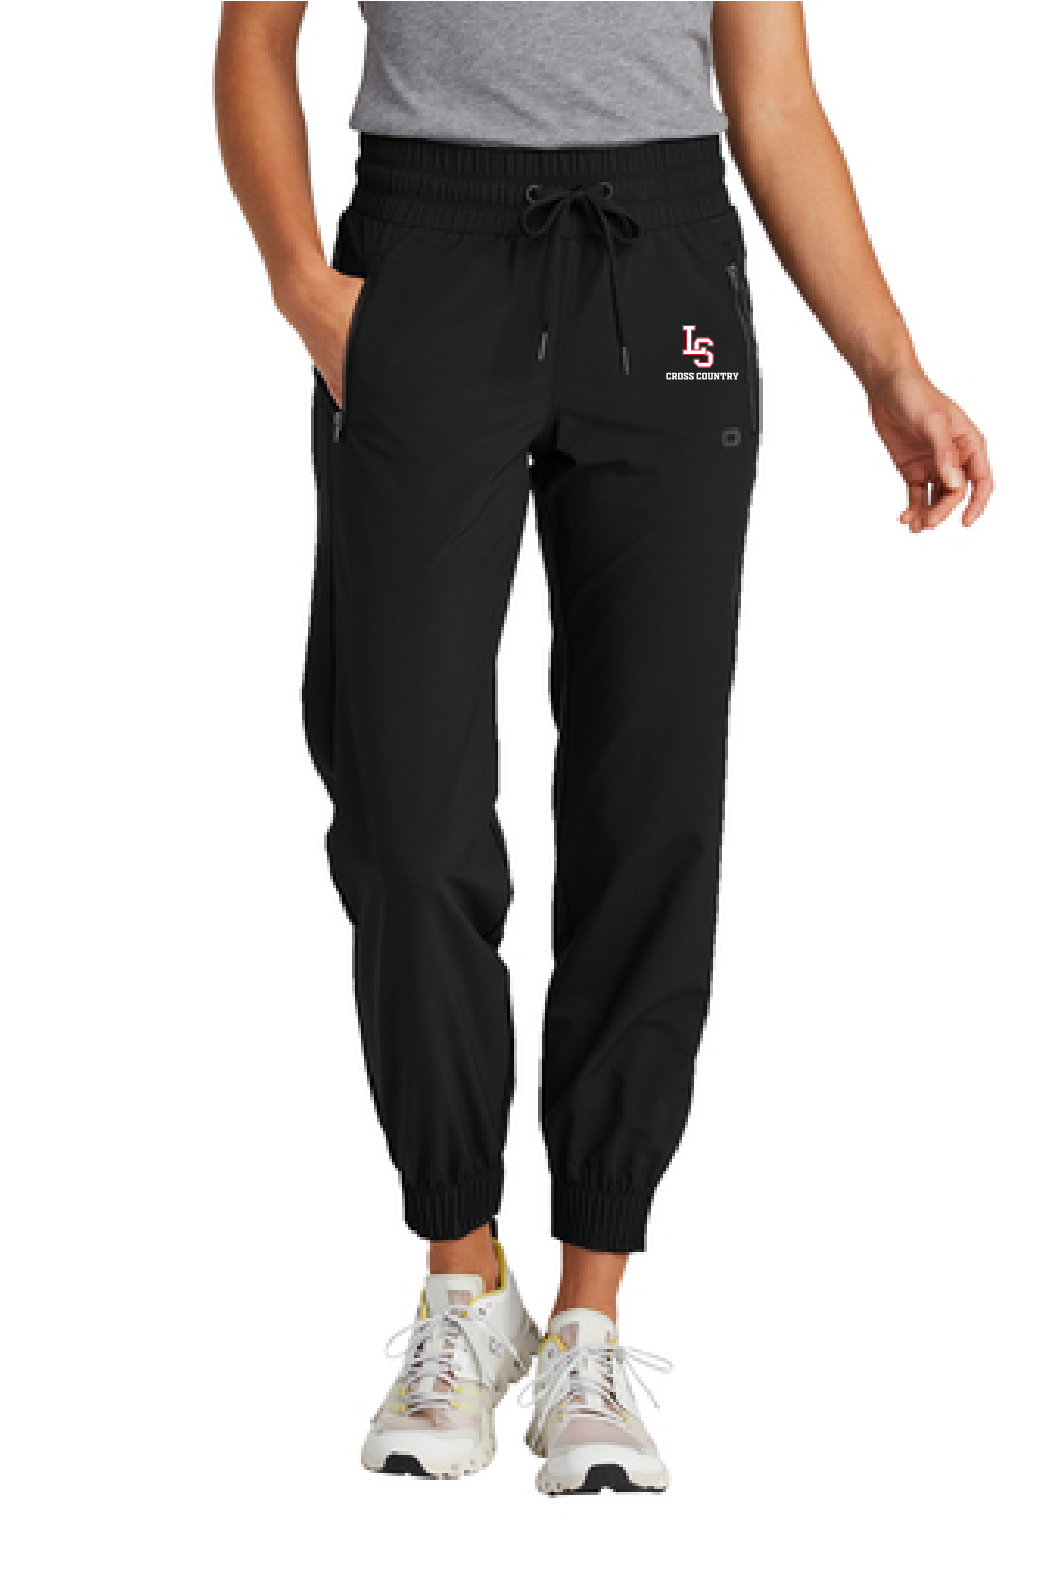 Lincoln Sudbury Cross Country Ladies Connection Jogger (LOG707)